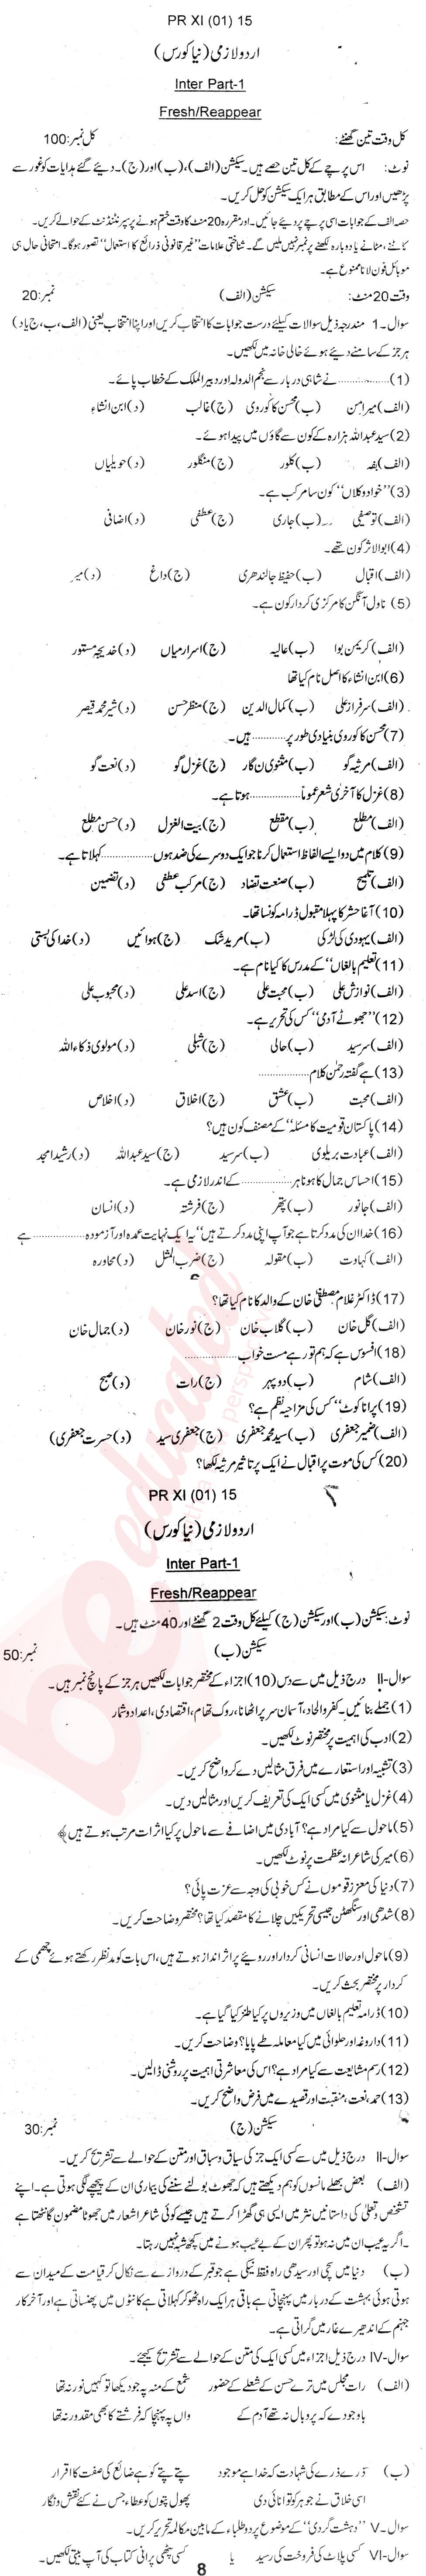 Urdu 11th class Past Paper Group 1 BISE Abbottabad 2015